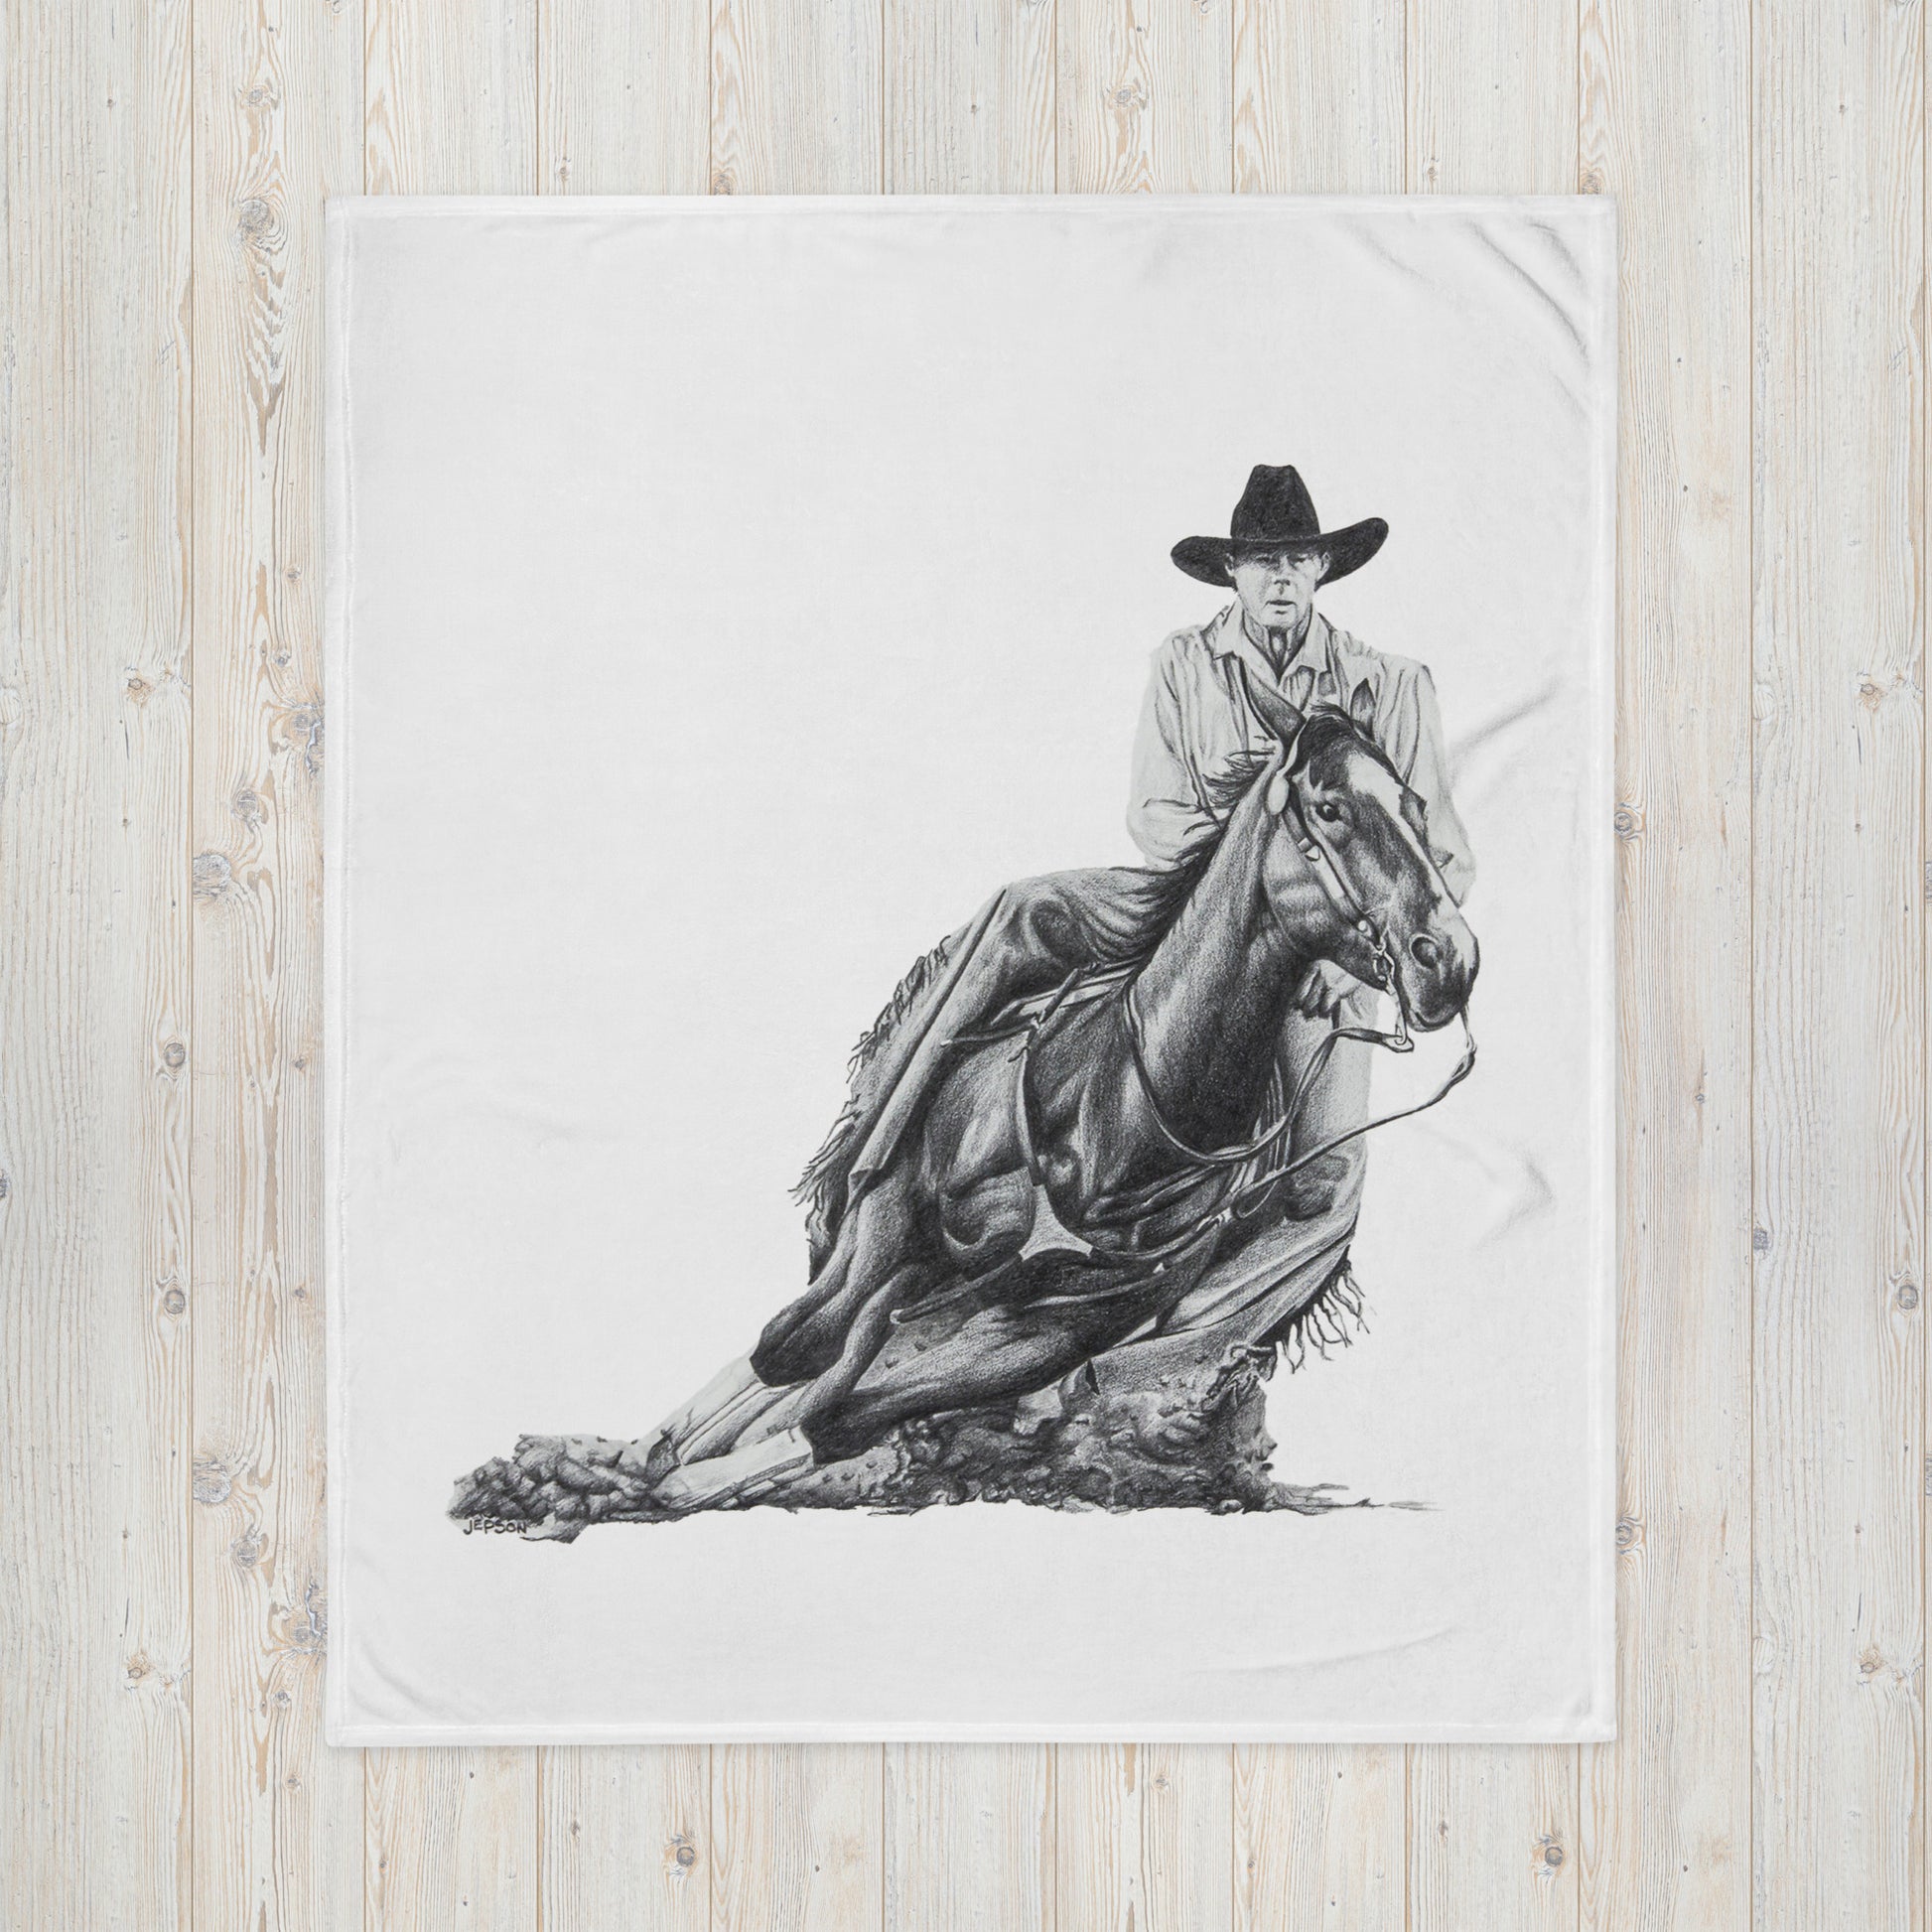 These "Cowboy Throw Blanket" are from a drawing of mine created with graphite pencil. It is titled "A Cut Above" as it is a cowboy on a cutting horse. It has been digitally optimized and transferred to a poly-cotton blend canvas.